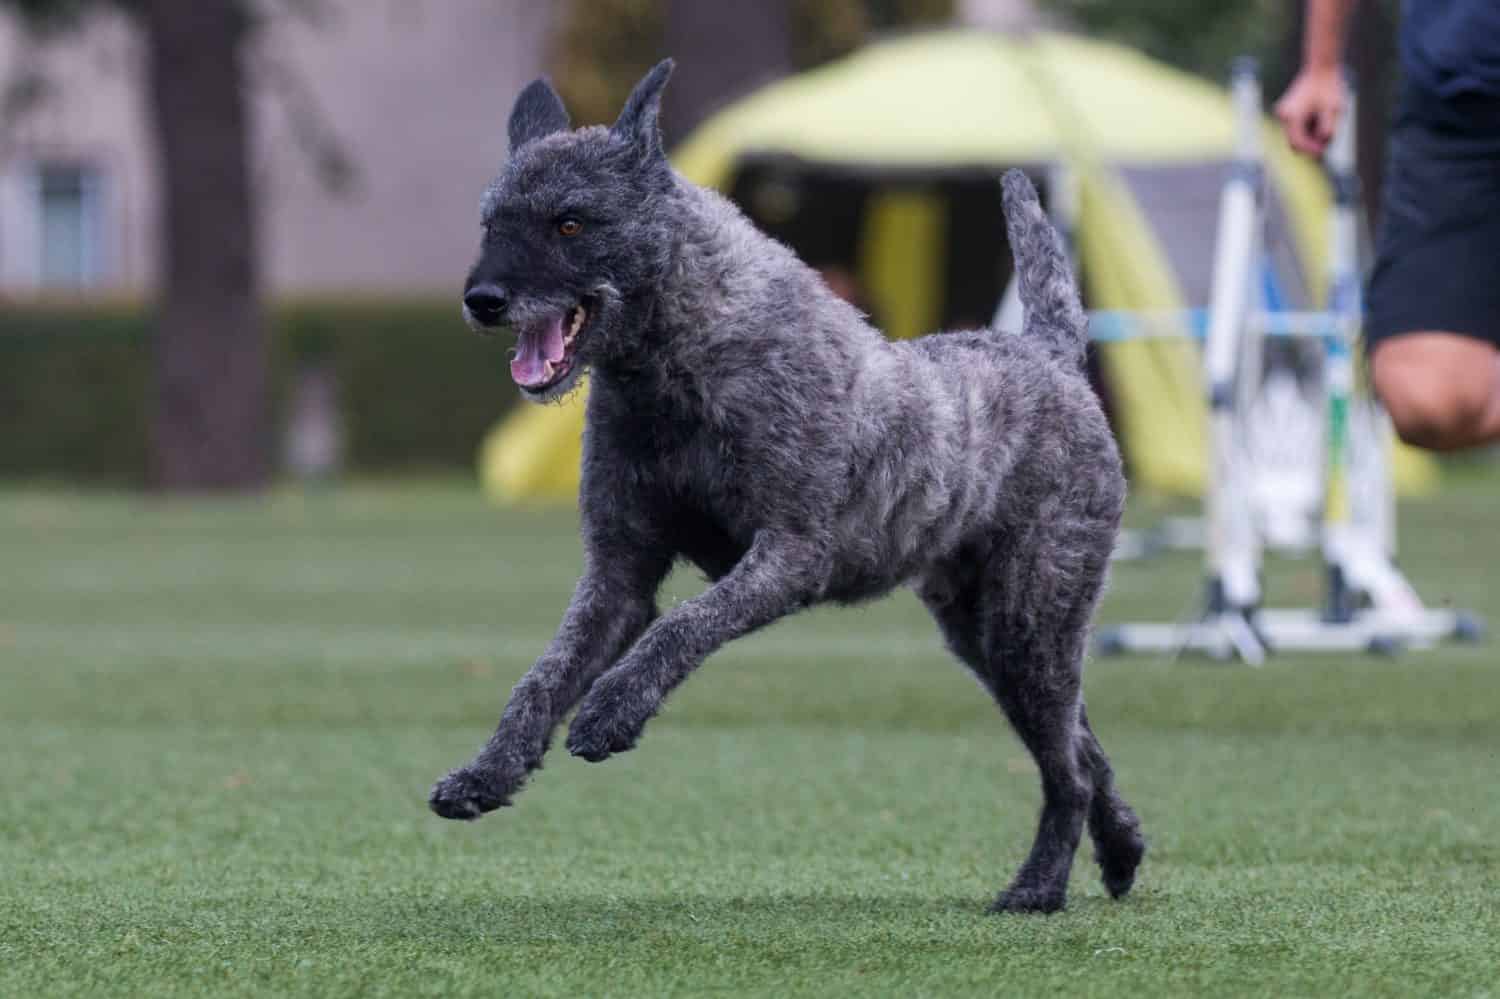 Rare unique gray brown with brindle Holland Dutch sheepdog herder running full speed on dog sport competition. Independent rough haired sheepdog outdoors on dog agility equipment running course